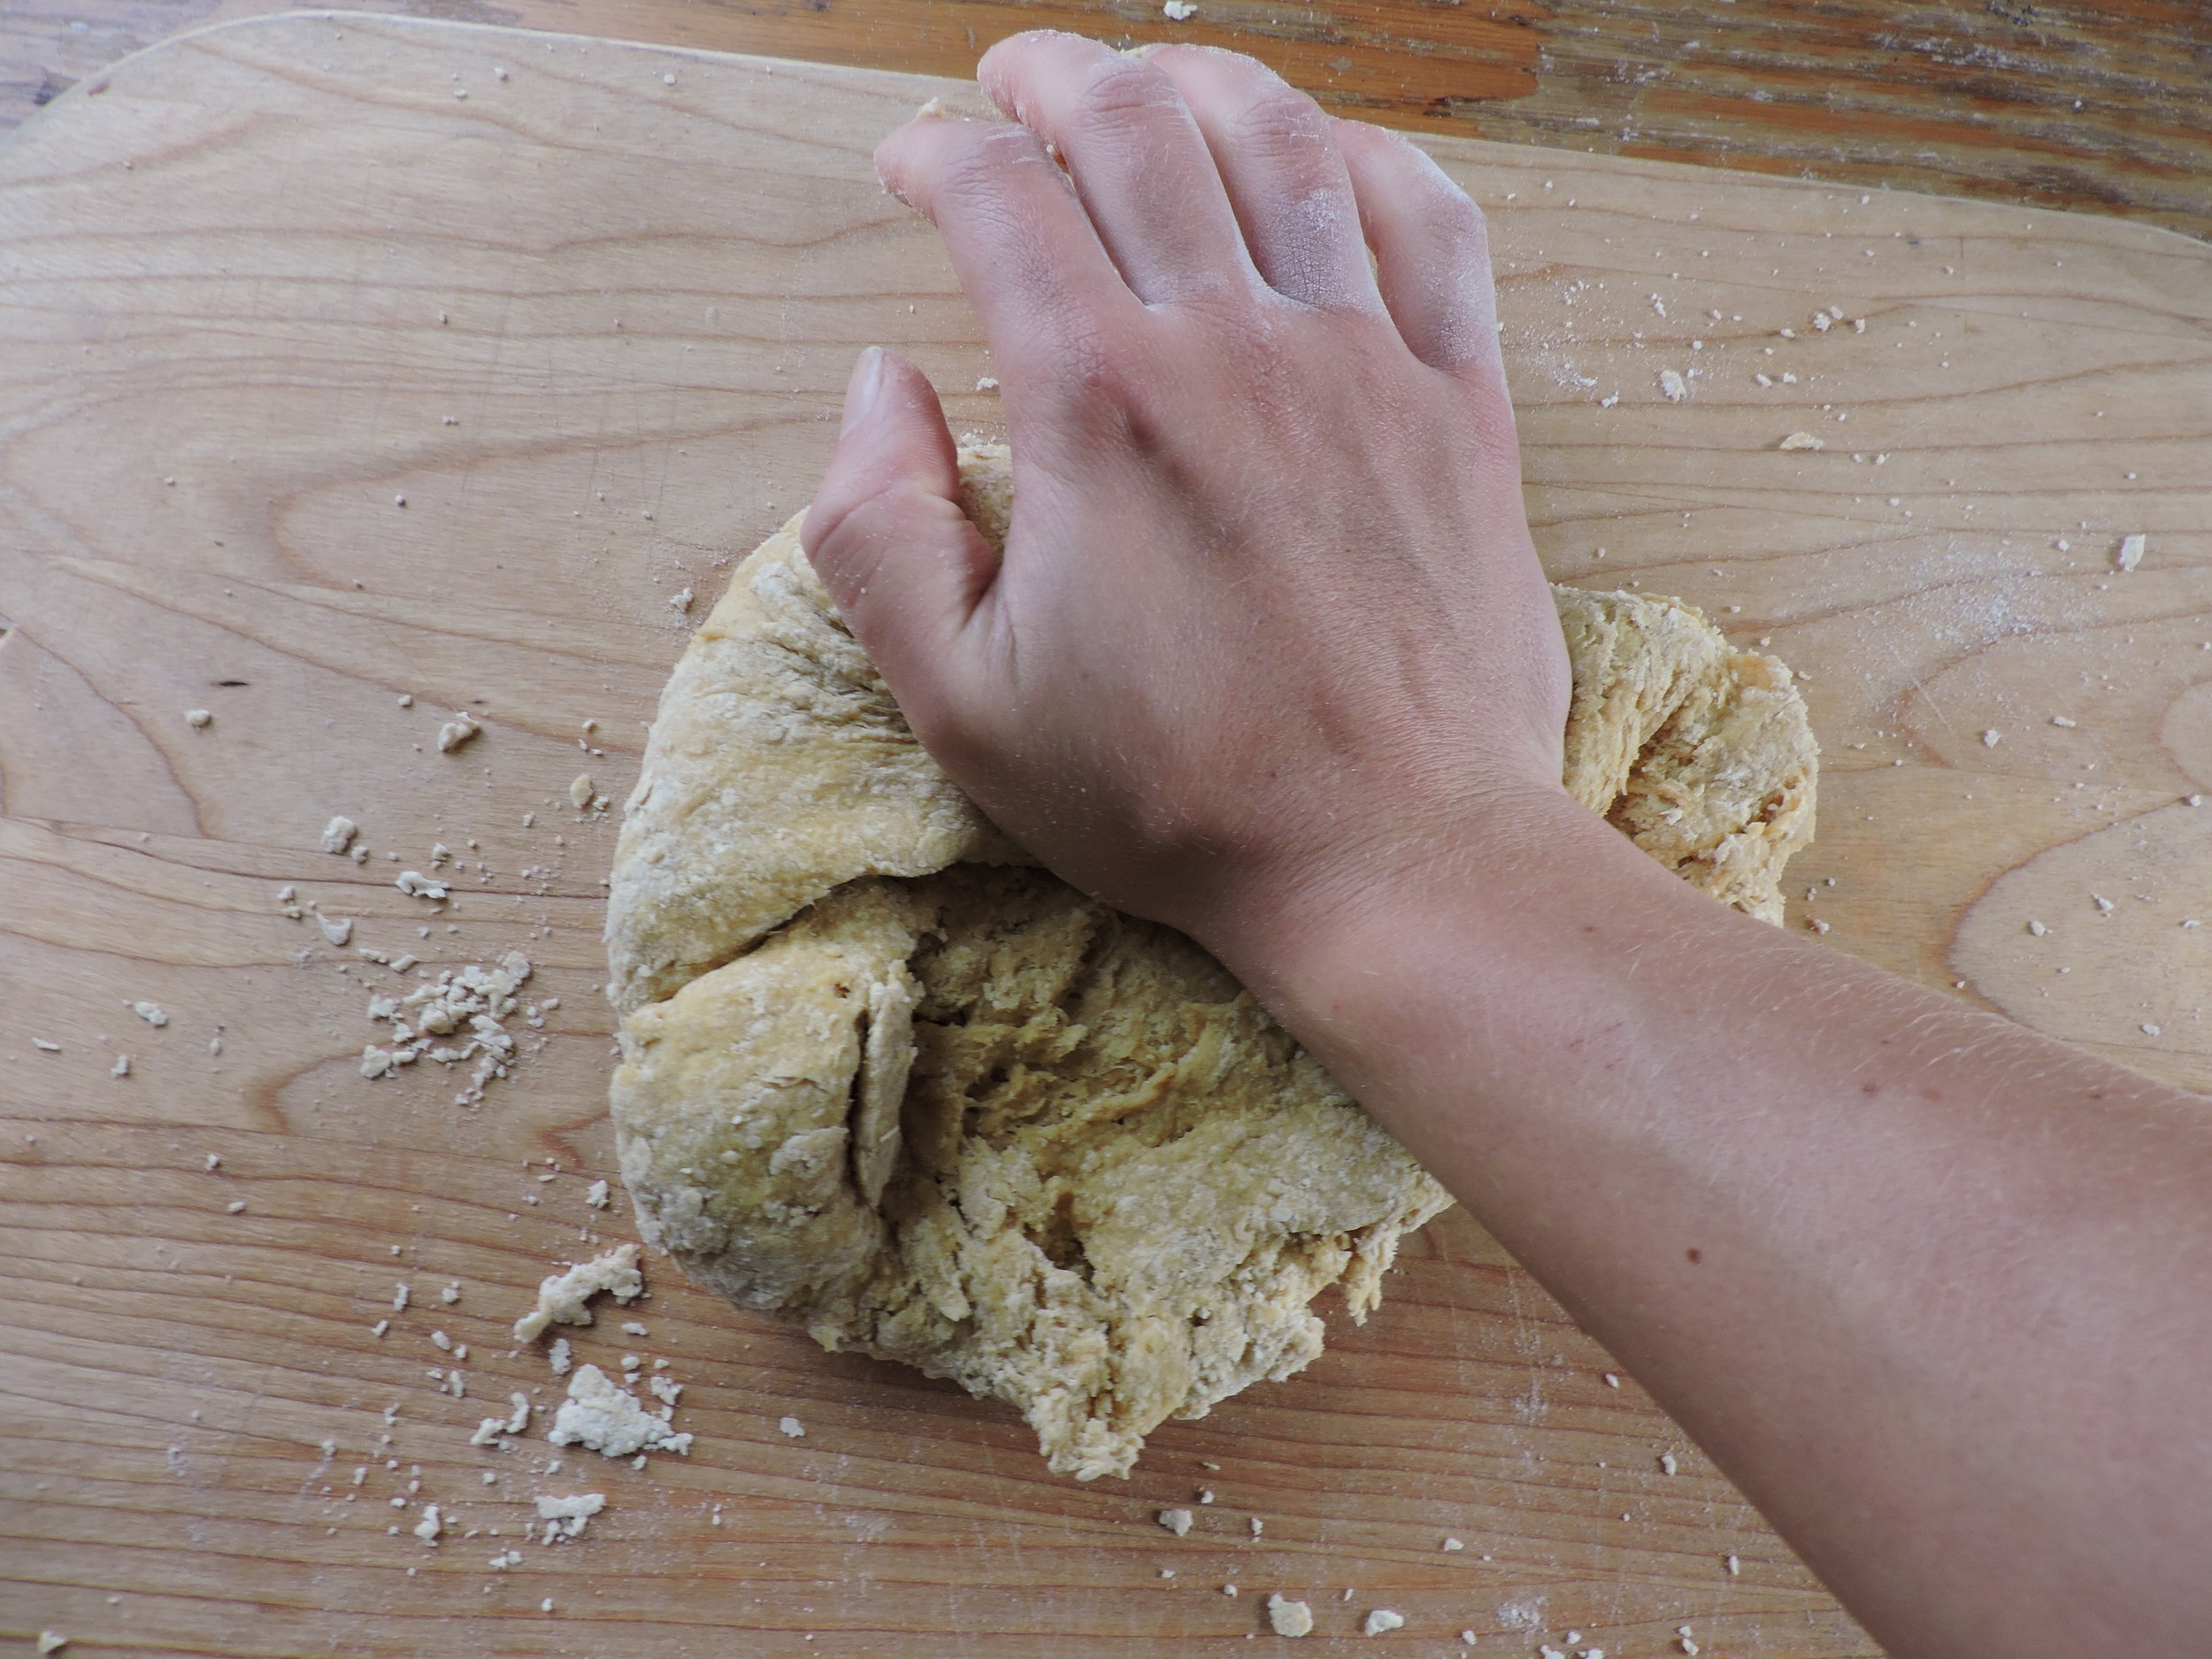  Knead until flour is fully hydrated and dough is smooth. 